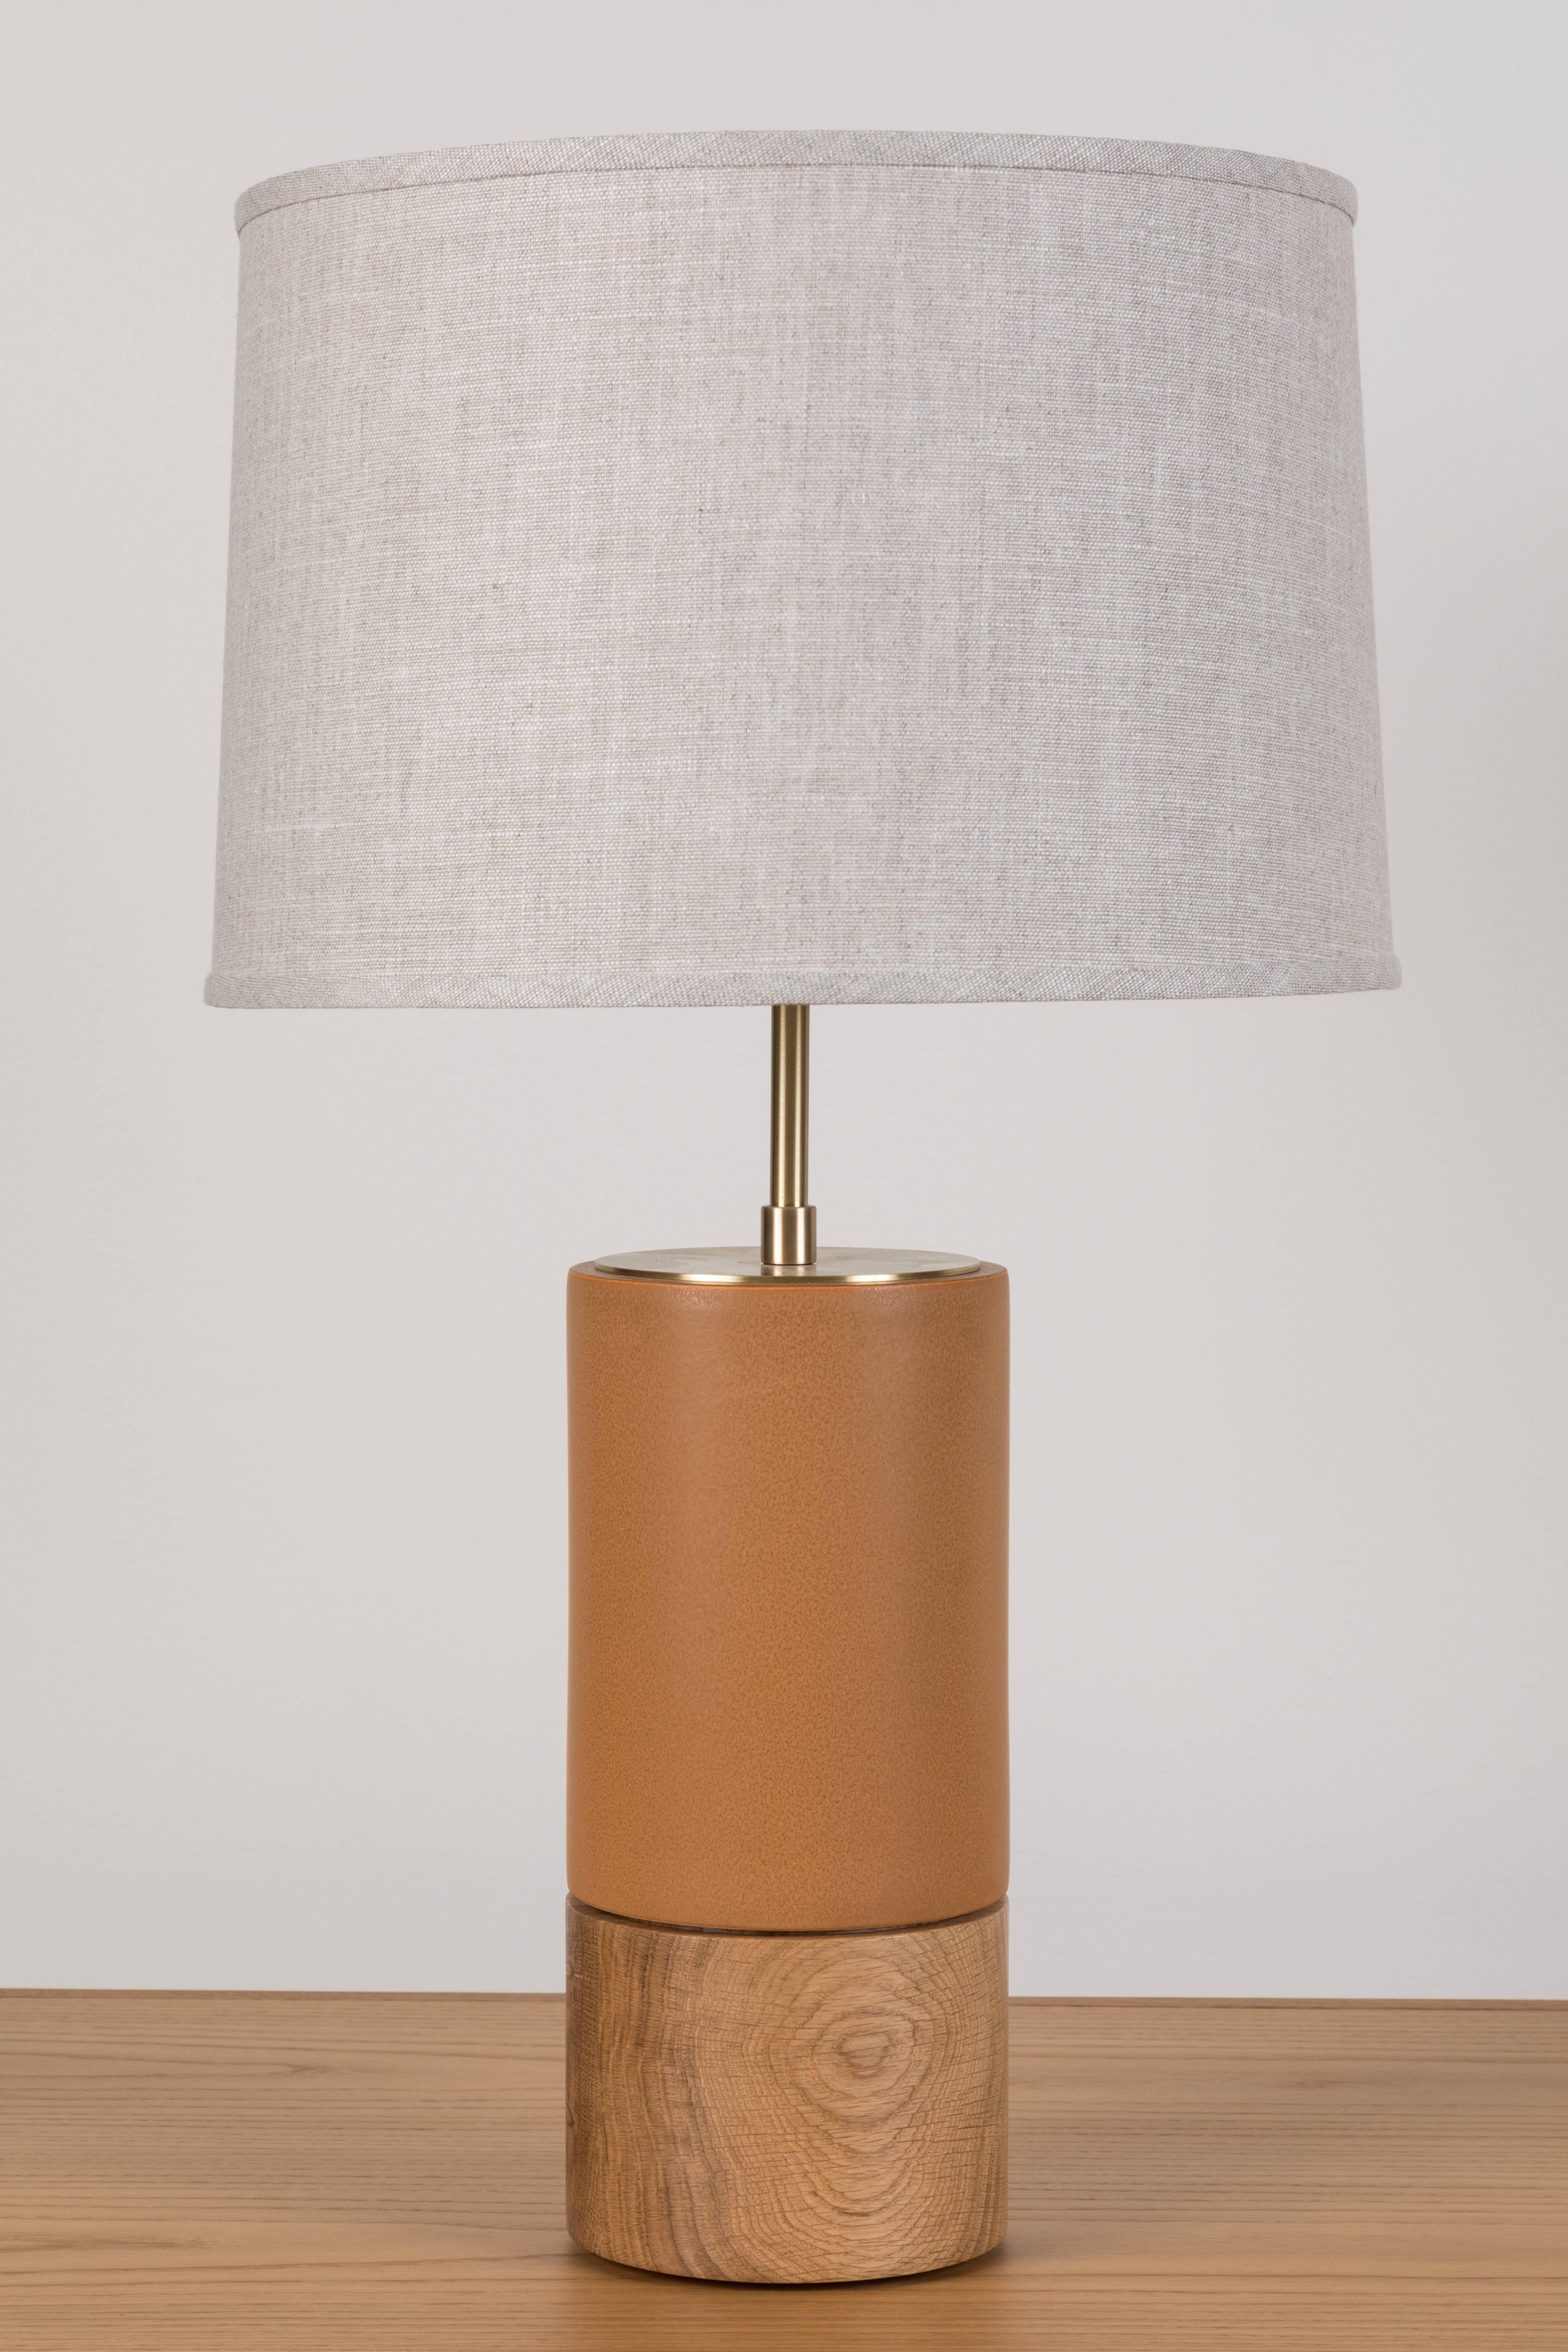 Pair of Short Baxter lamps by Stone and Sawyer

Available at Lawson-Fenning